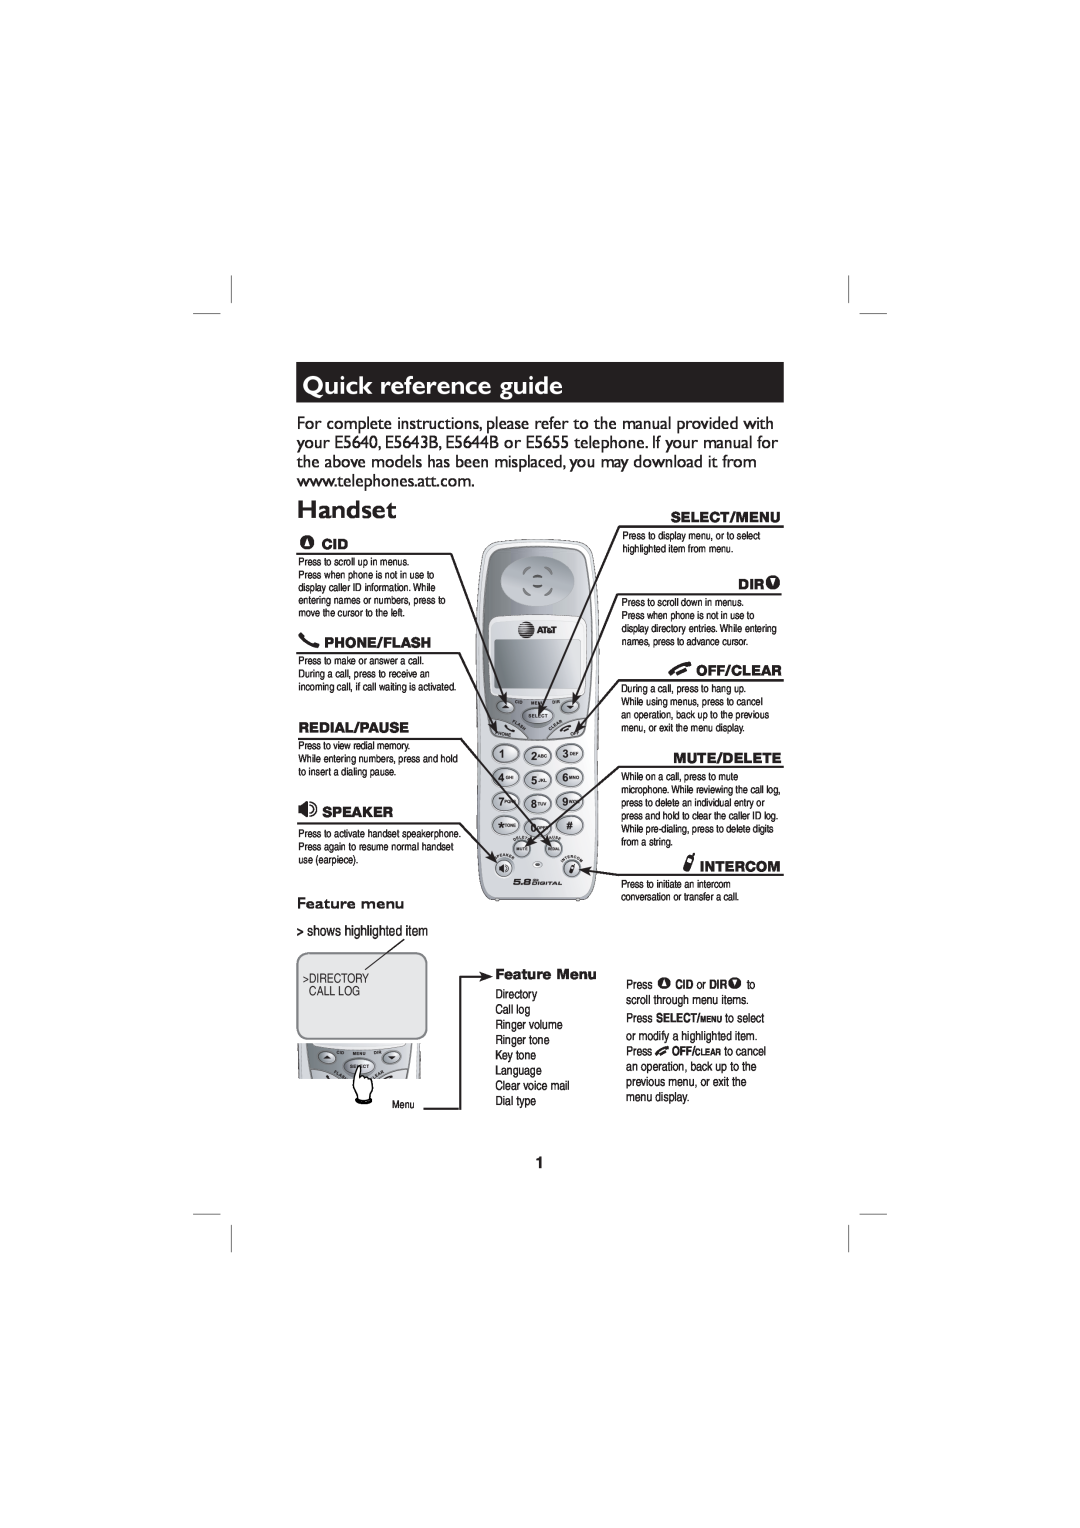 AT&T E5644B, E5655, E5640, E5643B Quick reference guide, Handset, Feature menu, shows highlighted item, Feature Menu 